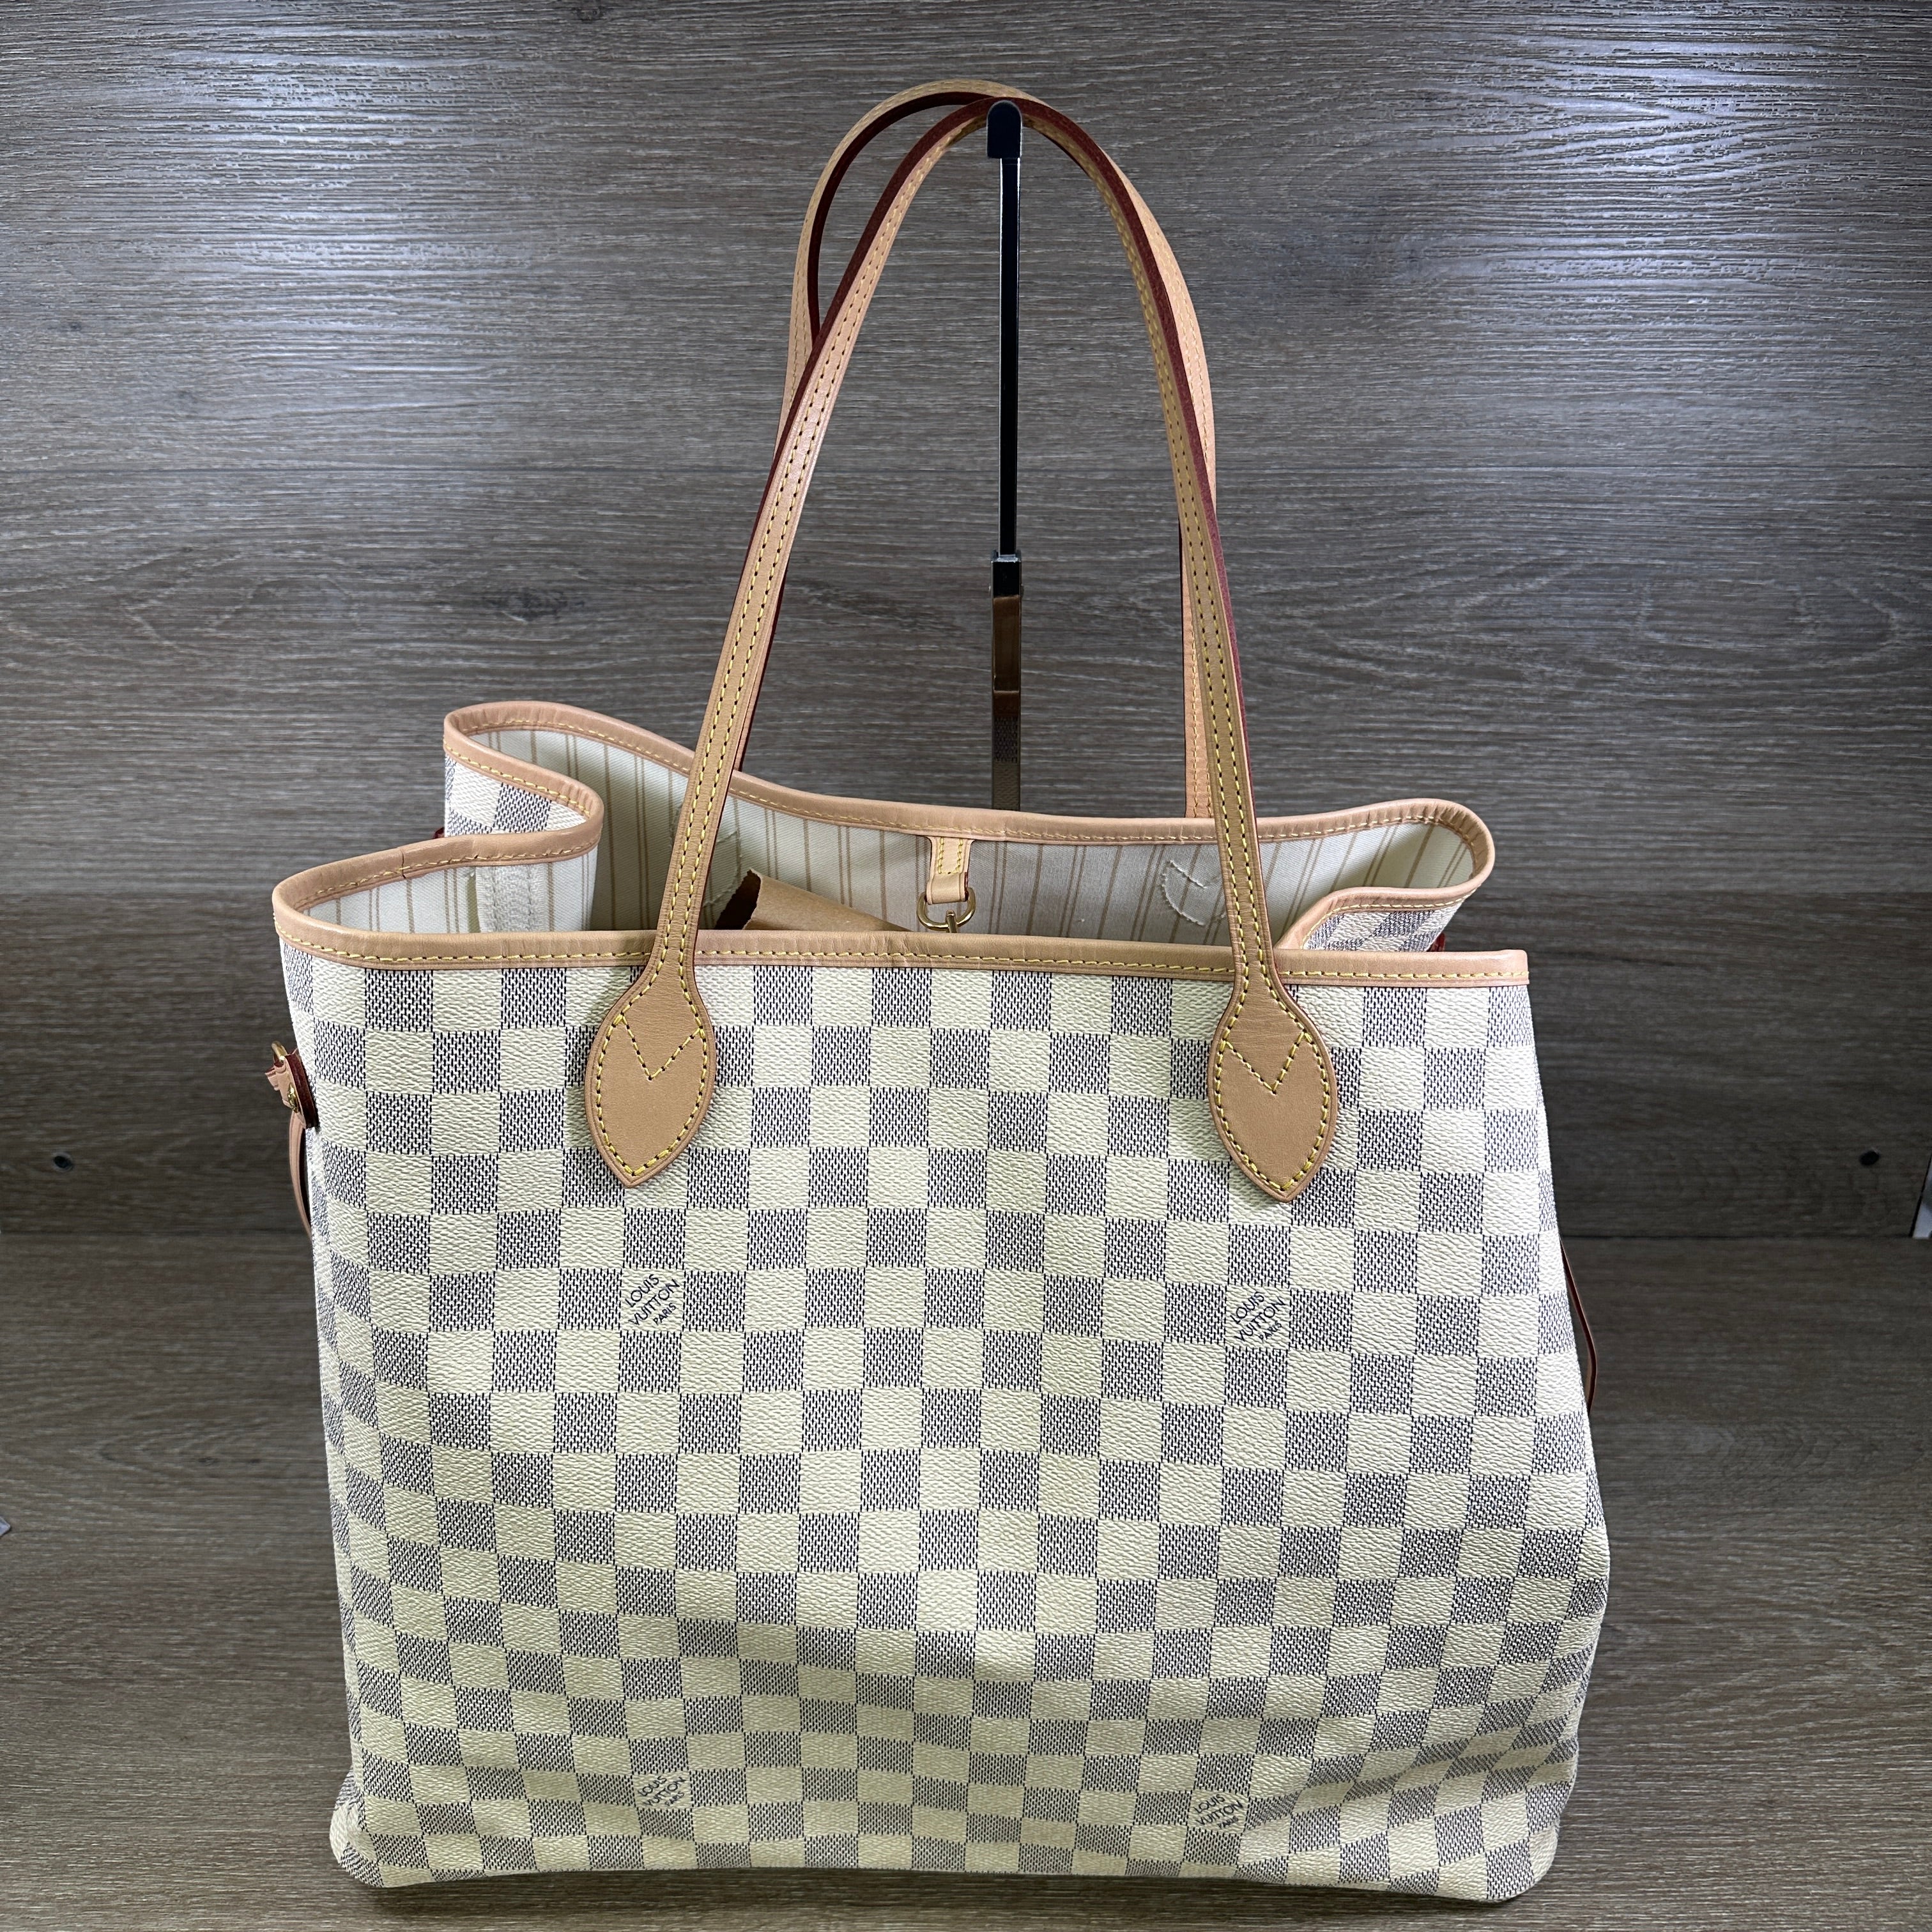 LV Graceful PM (Dust Bag) Dust Bag in Australia and USA